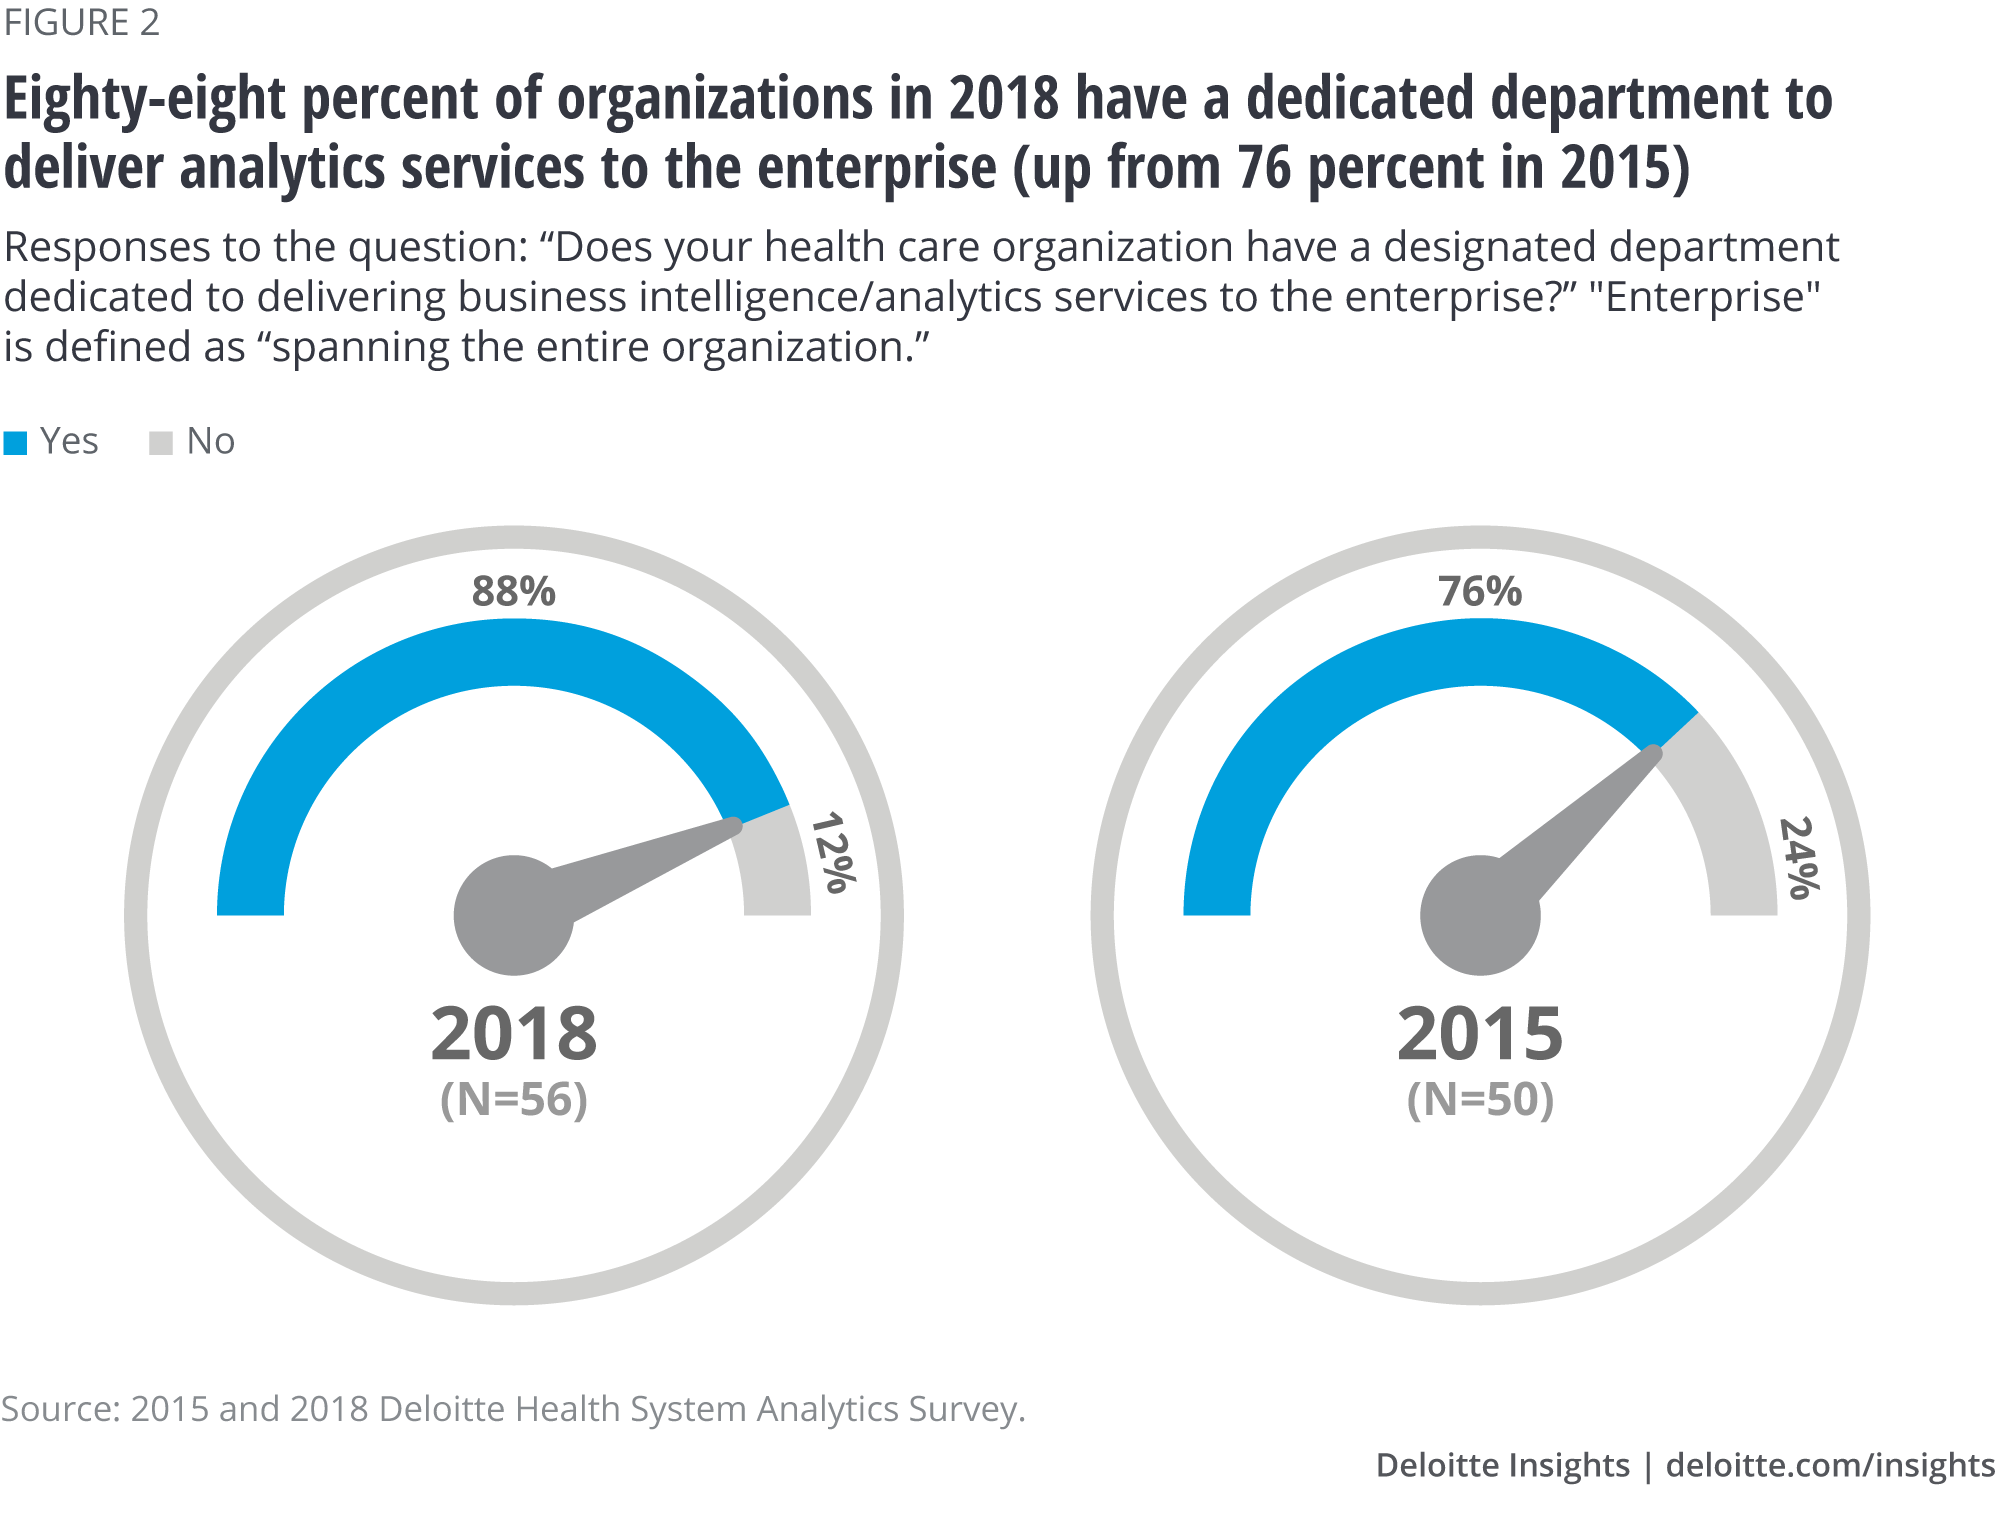 Eighty-eight percent of organizations in 2018 have a dedicated department to deliver analytics services to the enterprise (up from 76 percent in 2015)